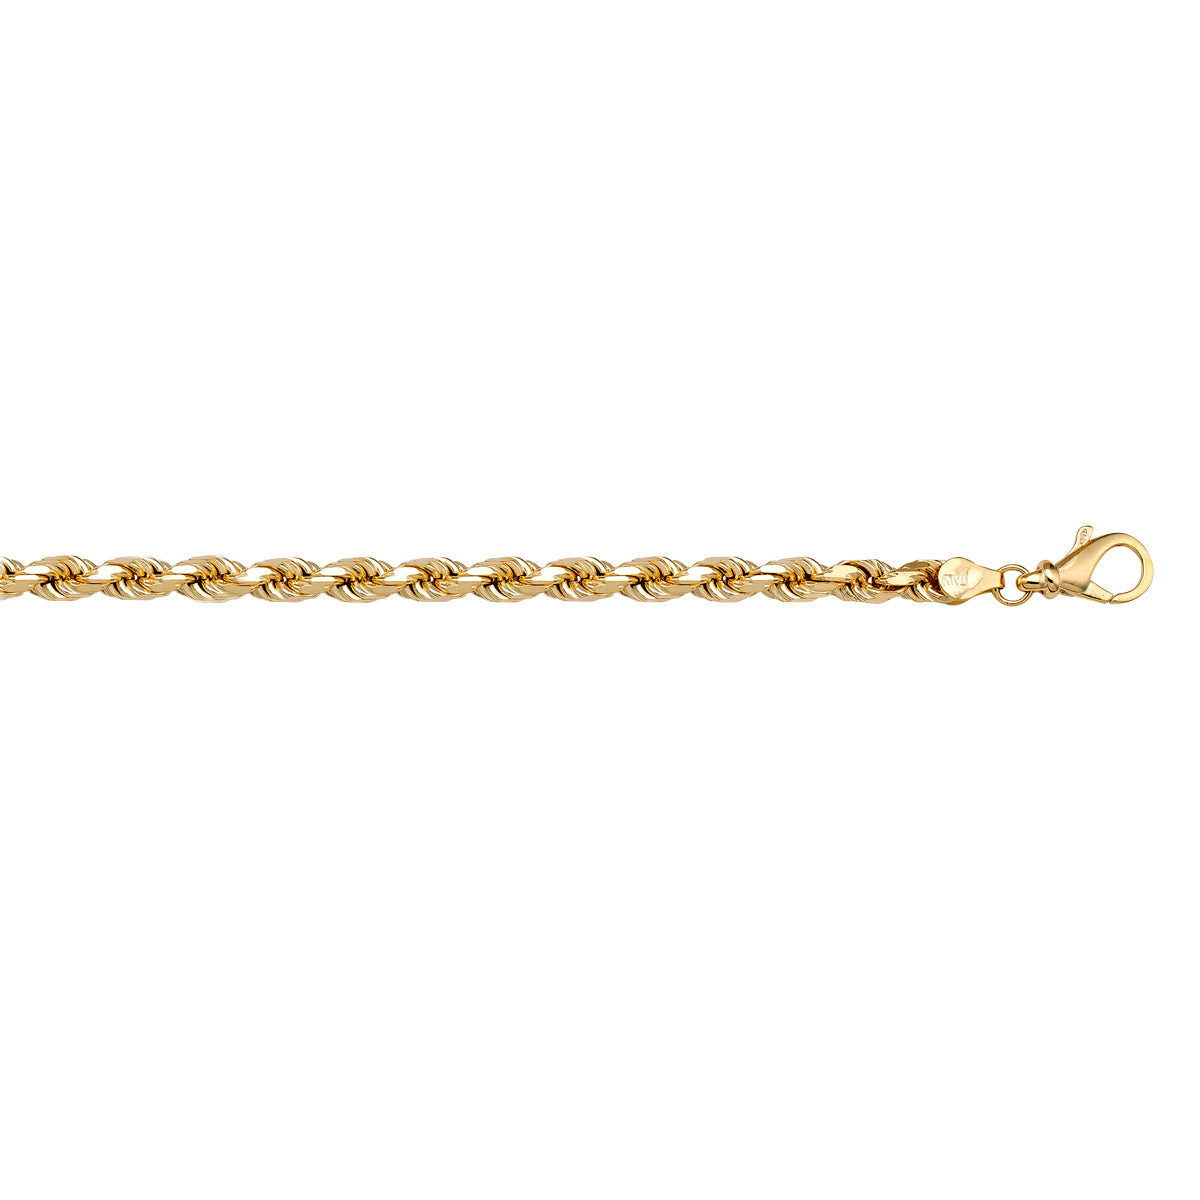 BRACELETS YELLOW GOLD SOLID ROPE LINK CHAIN